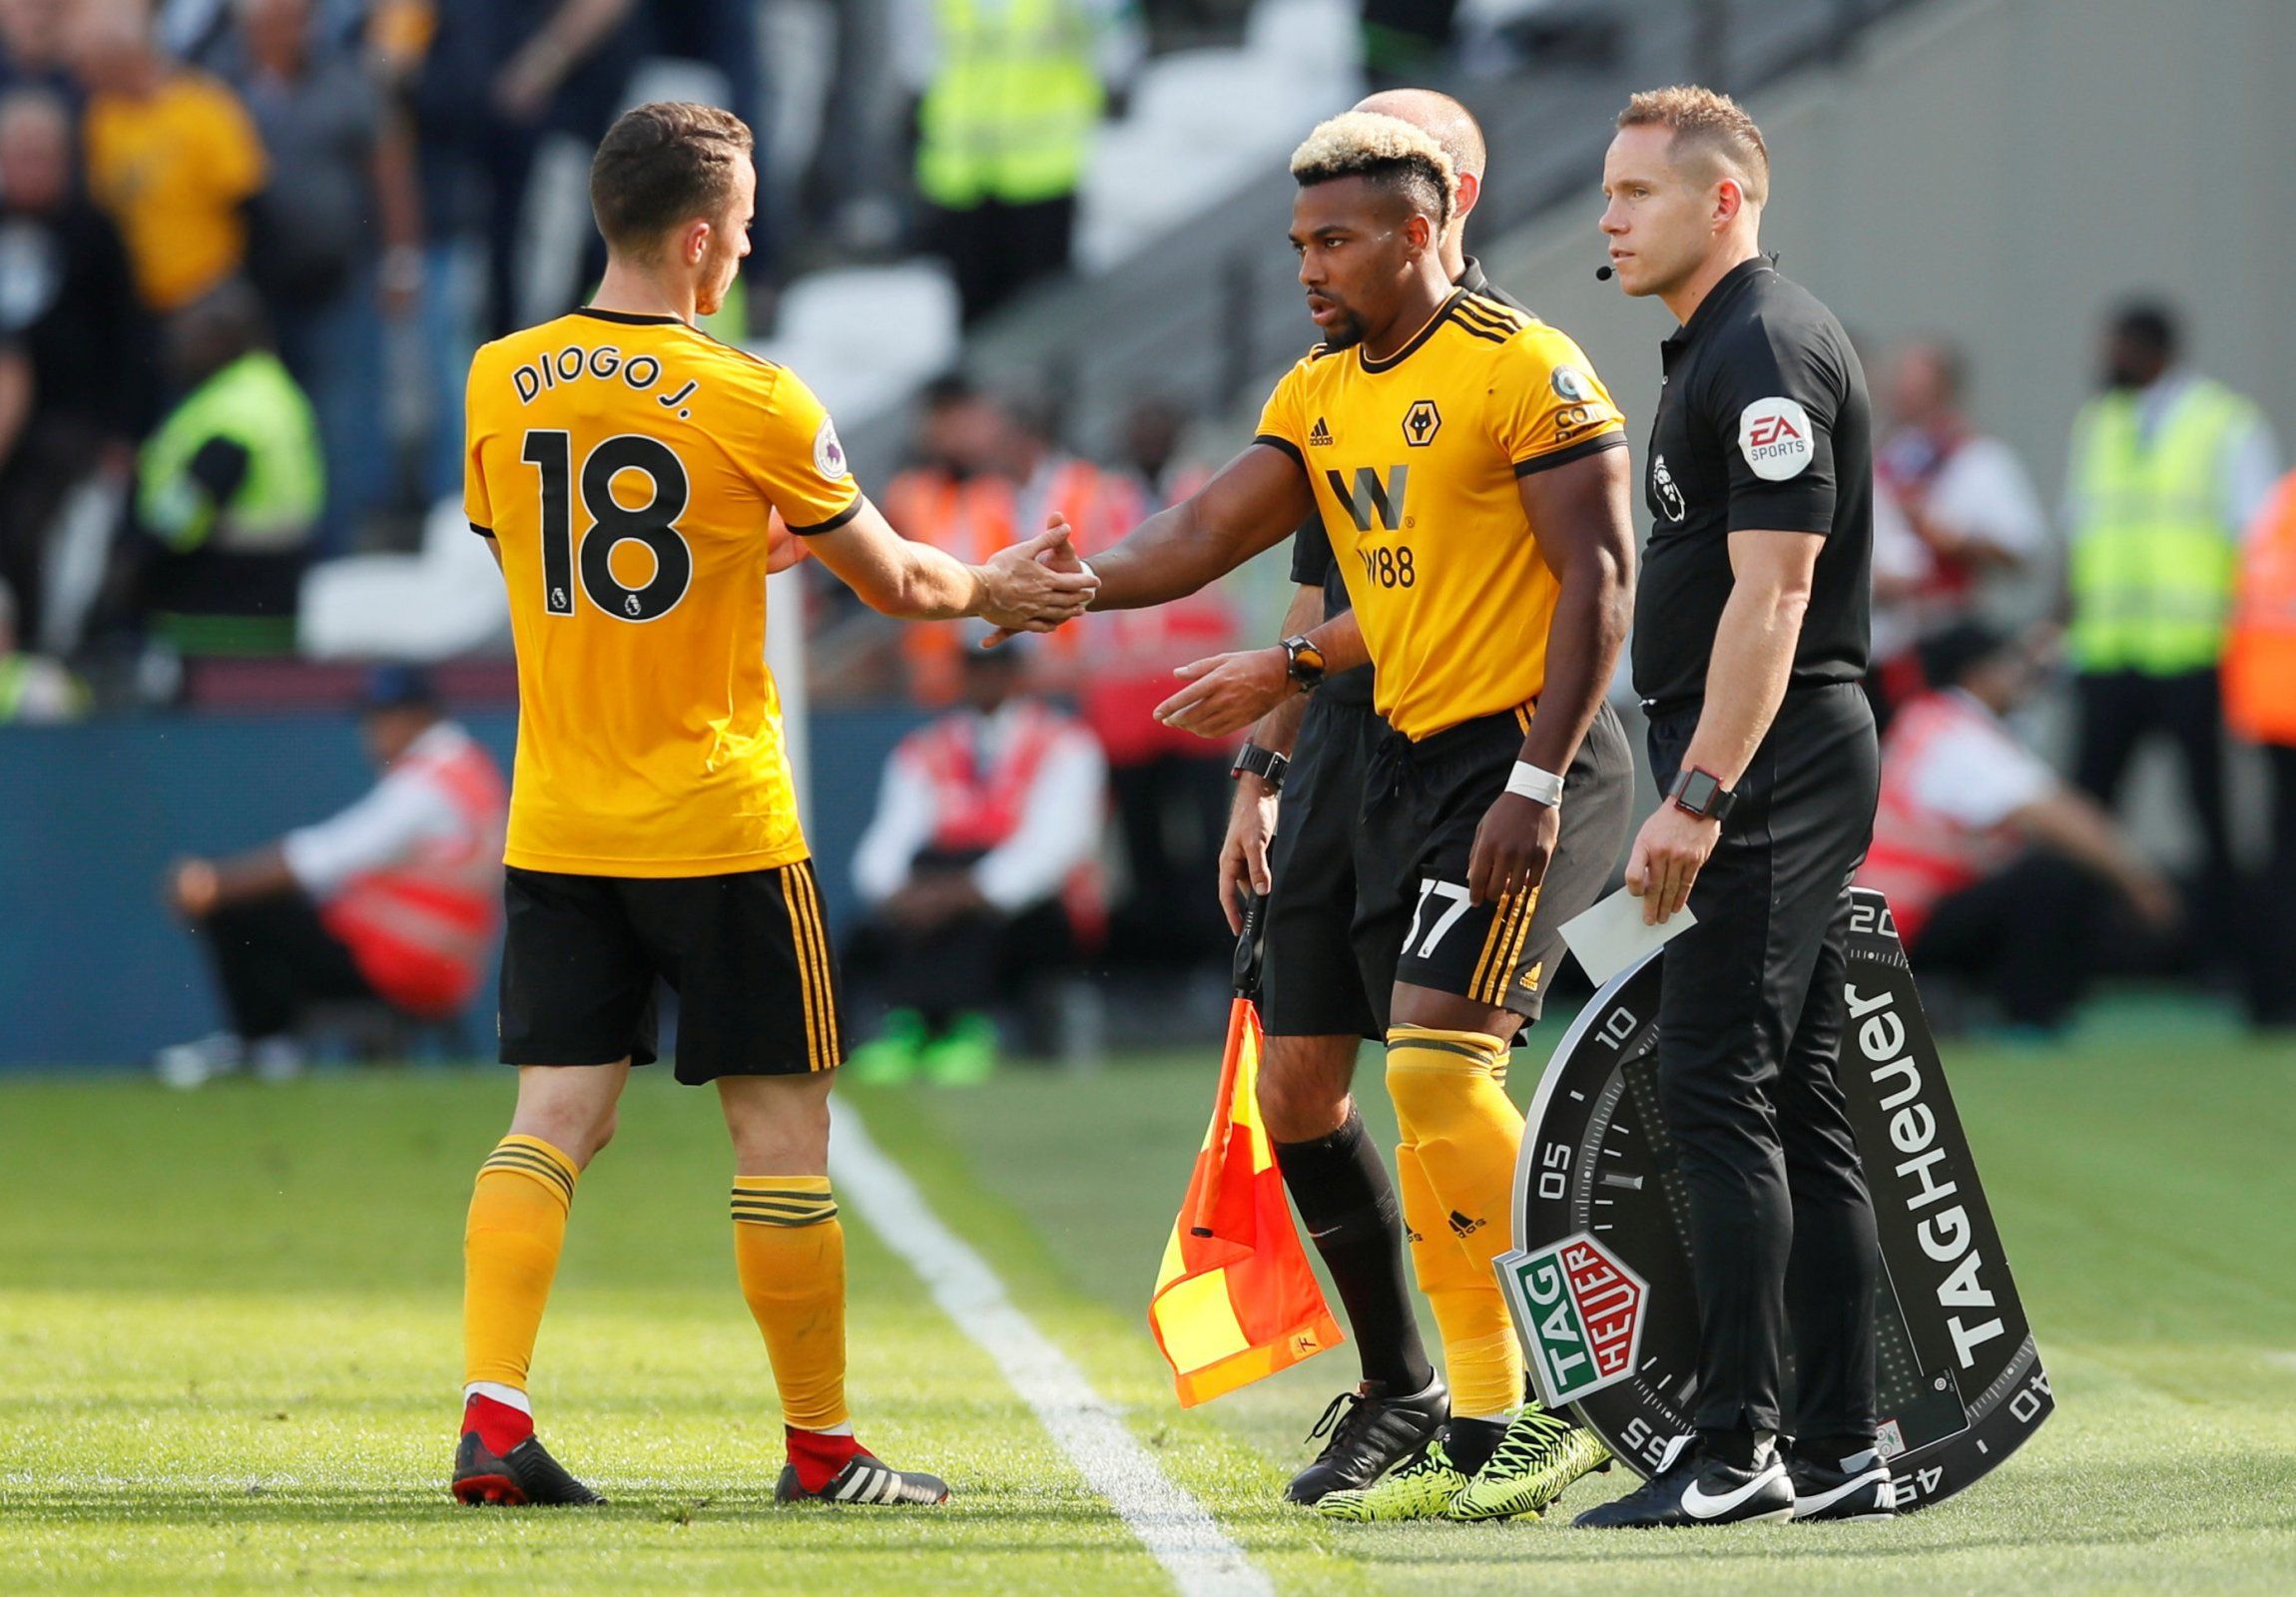 Adama Traore comes on for Diogo Jota for Wolves